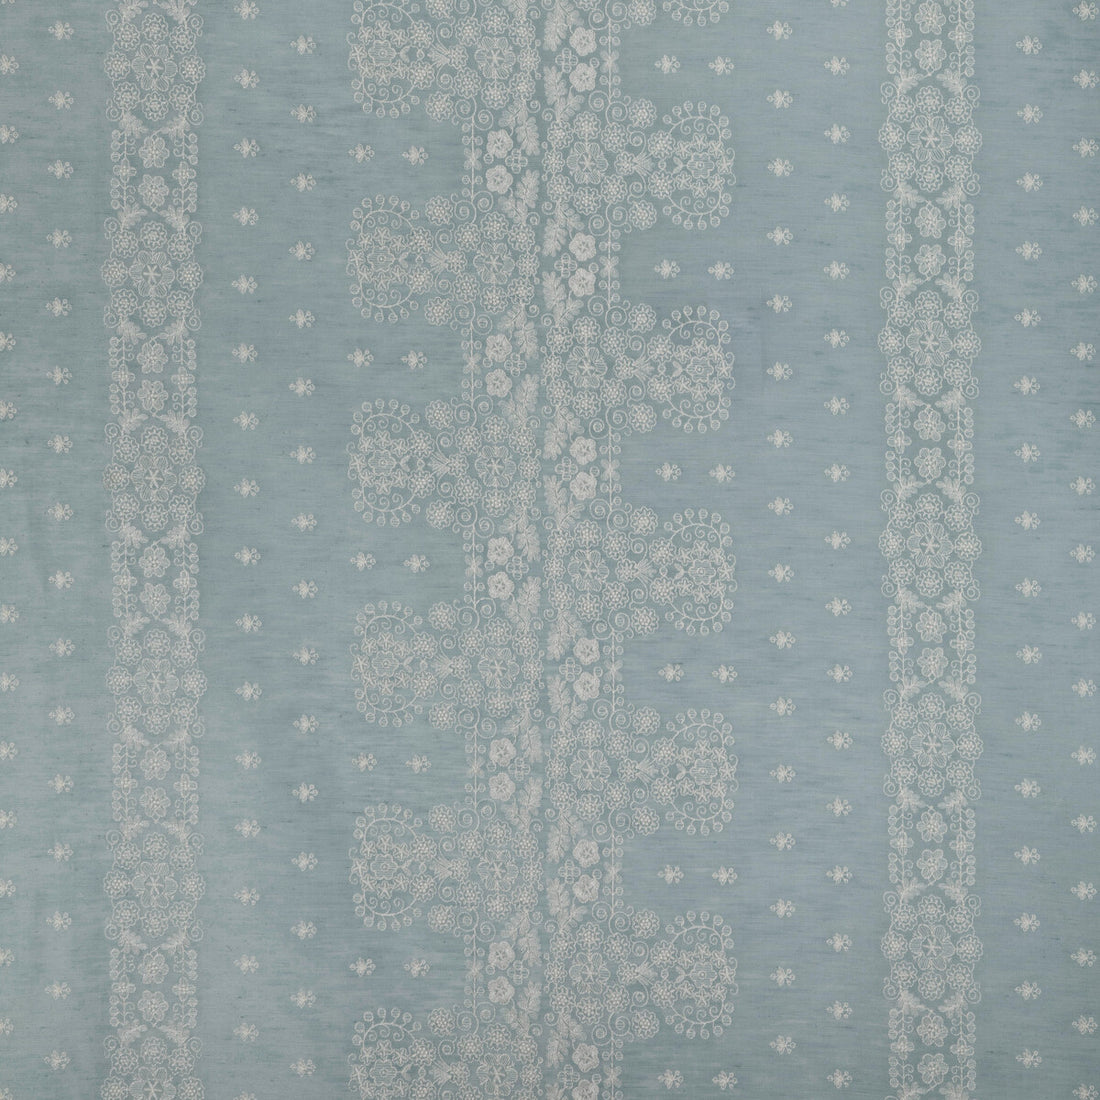 Coulet Sheer fabric in sky color - pattern 8023109.15.0 - by Brunschwig &amp; Fils in the Anduze Embroideries collection